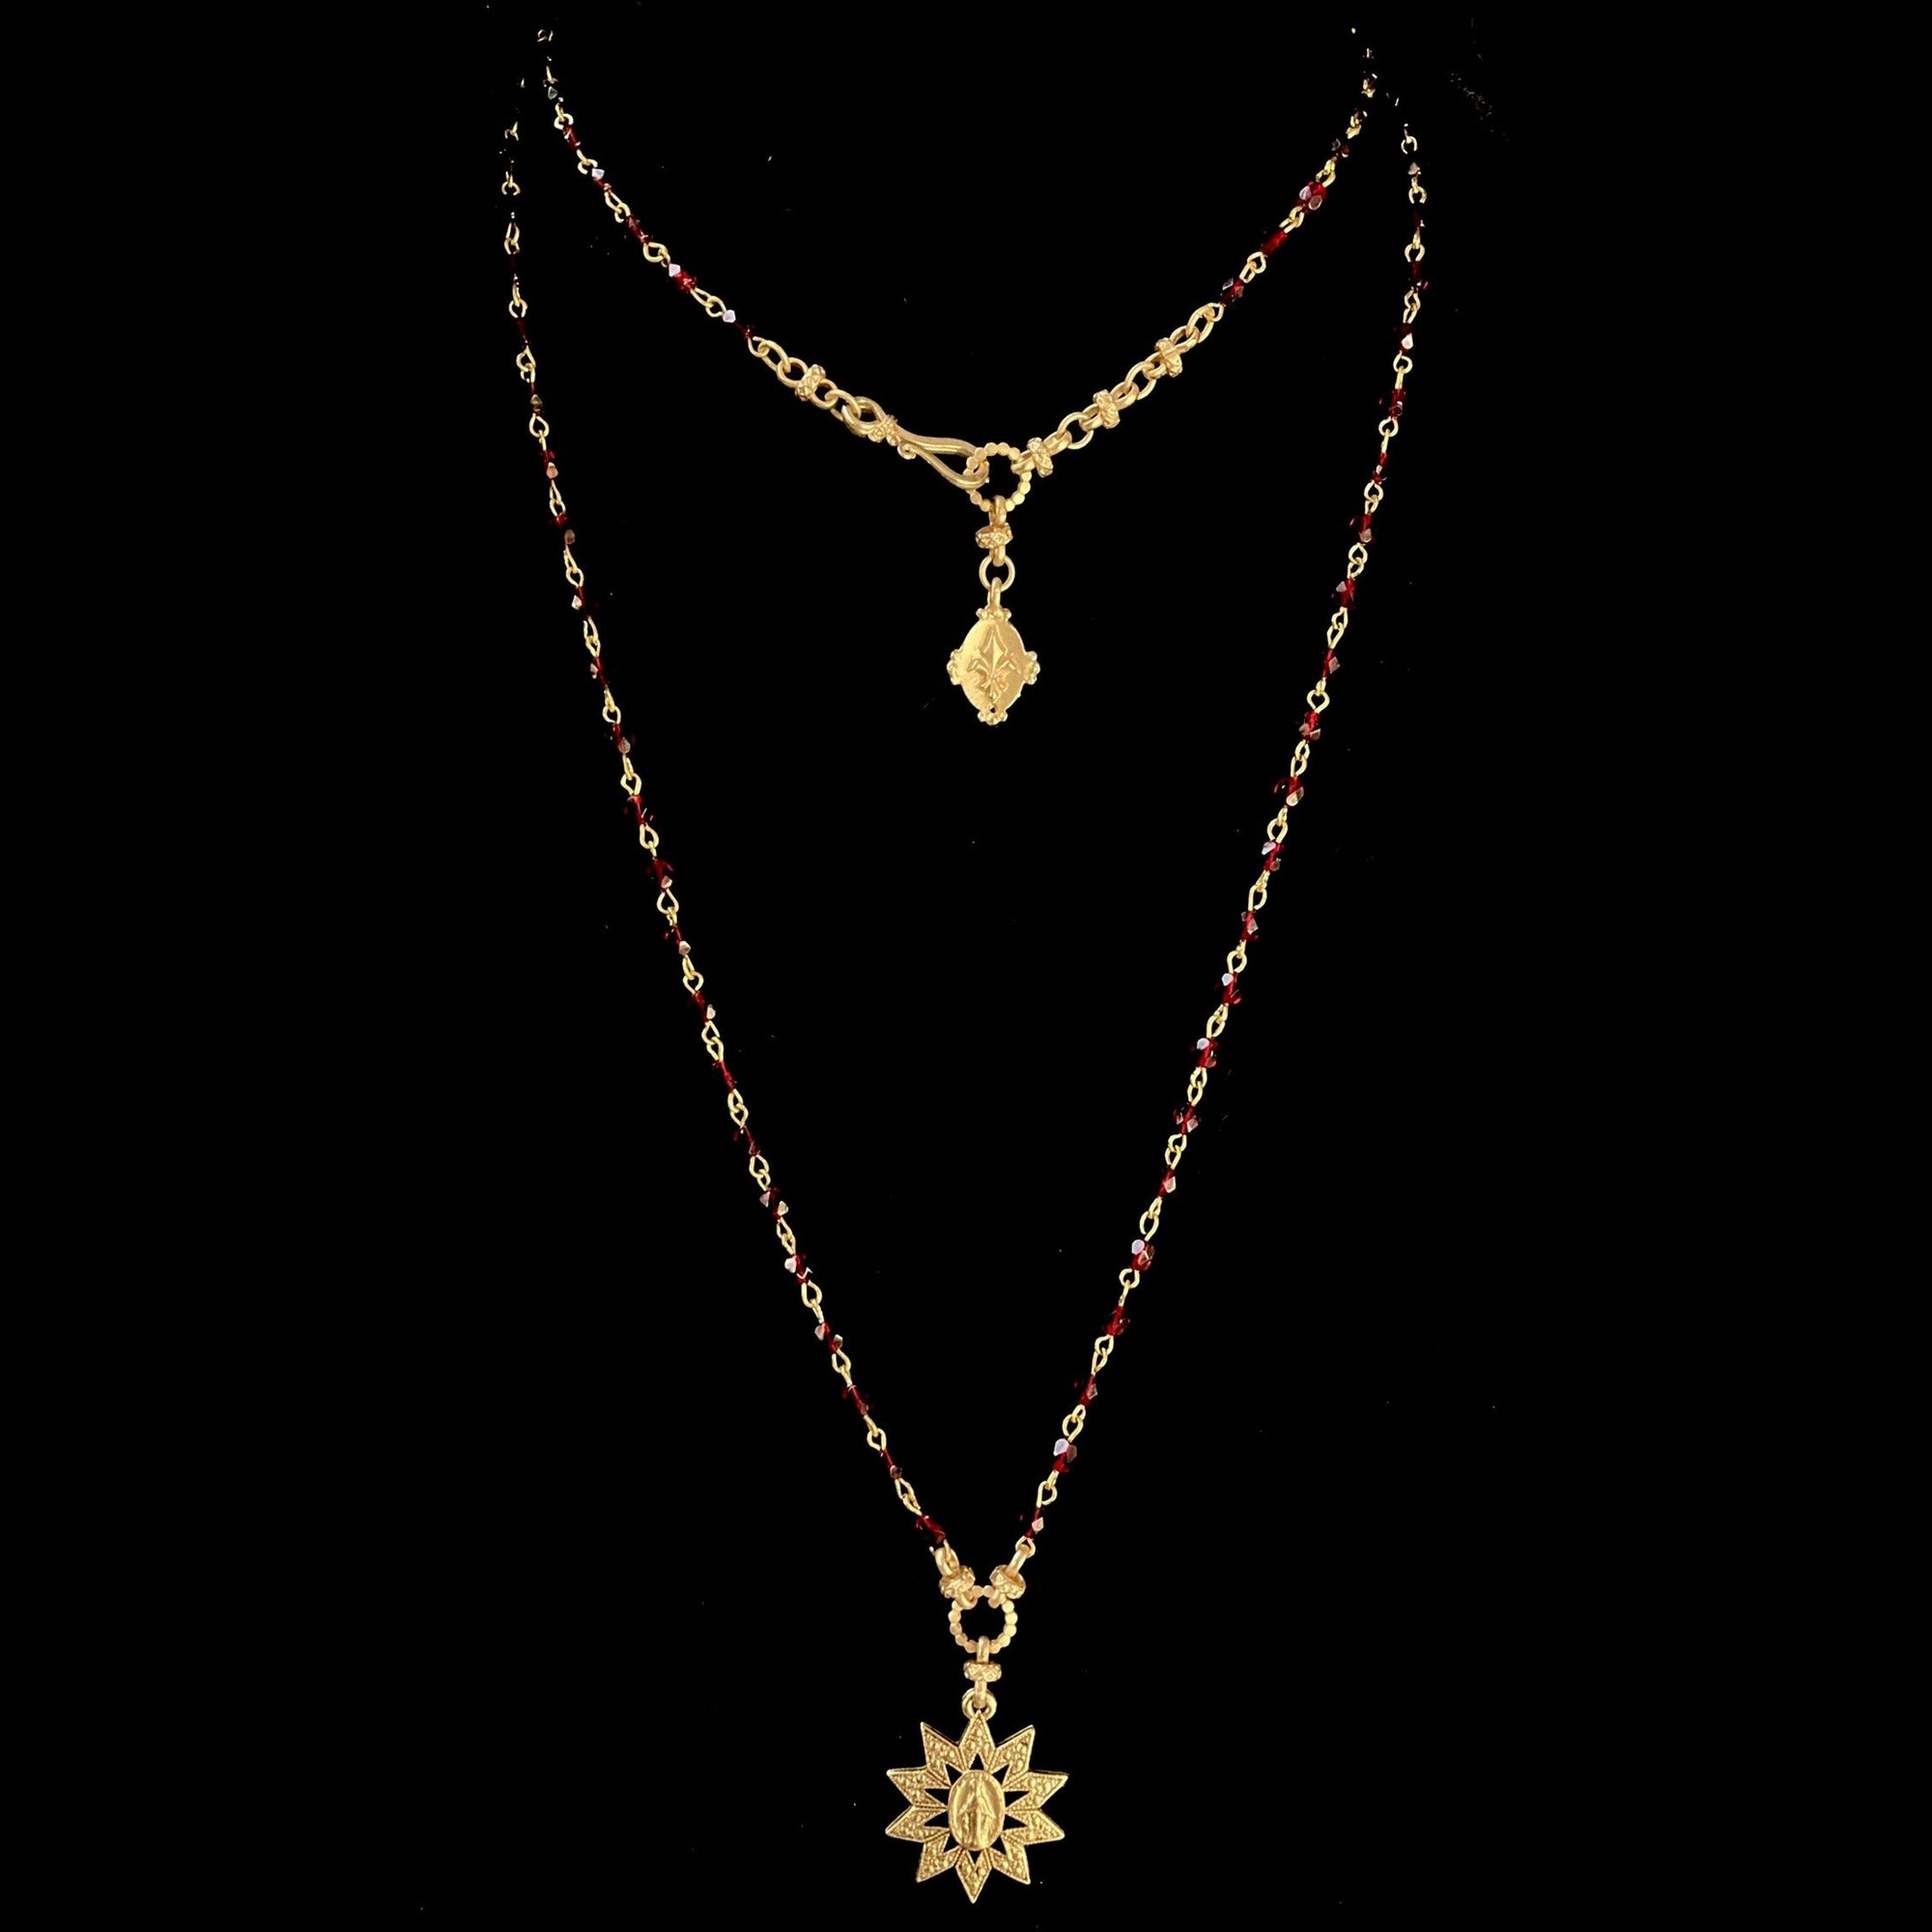 Forgotten Graces "Miraculous Rays" Medal in Garnet and Gold Necklace